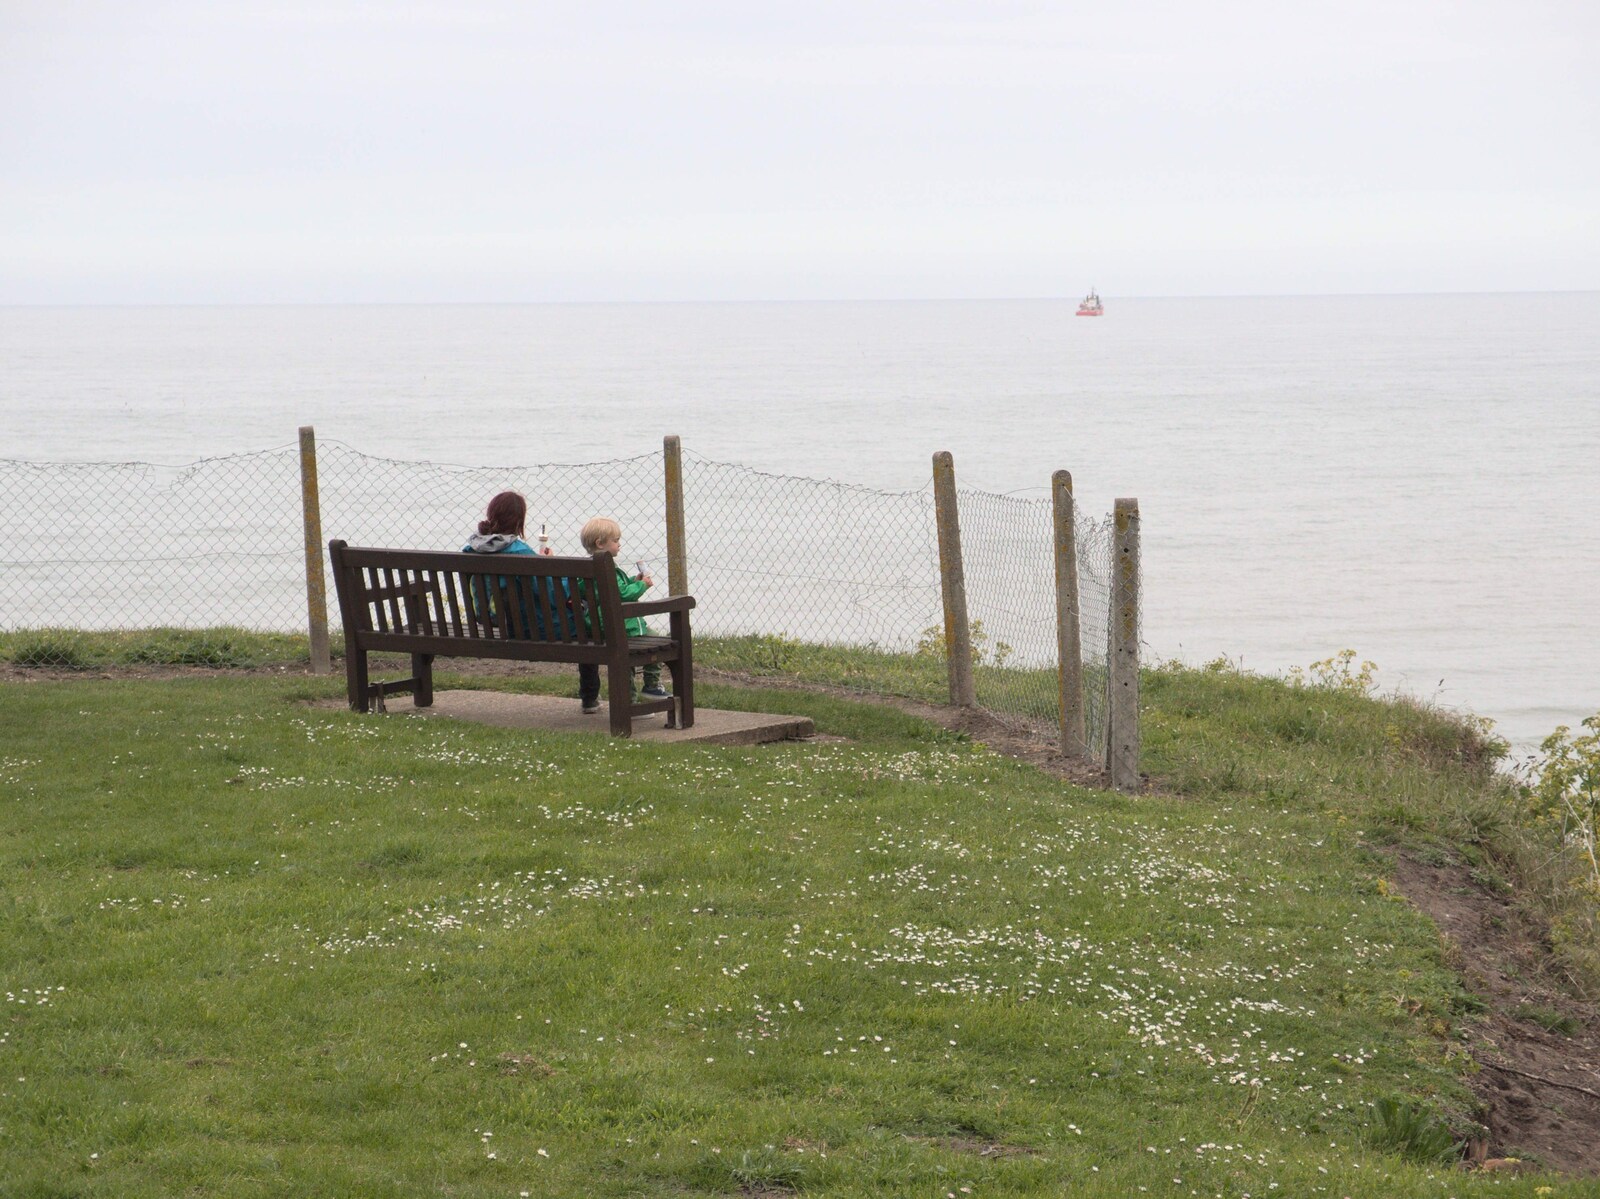 Isobel and Gabes look out to sea from A Birthday Camping Trip, East Runton, North Norfolk - 26th May 2015